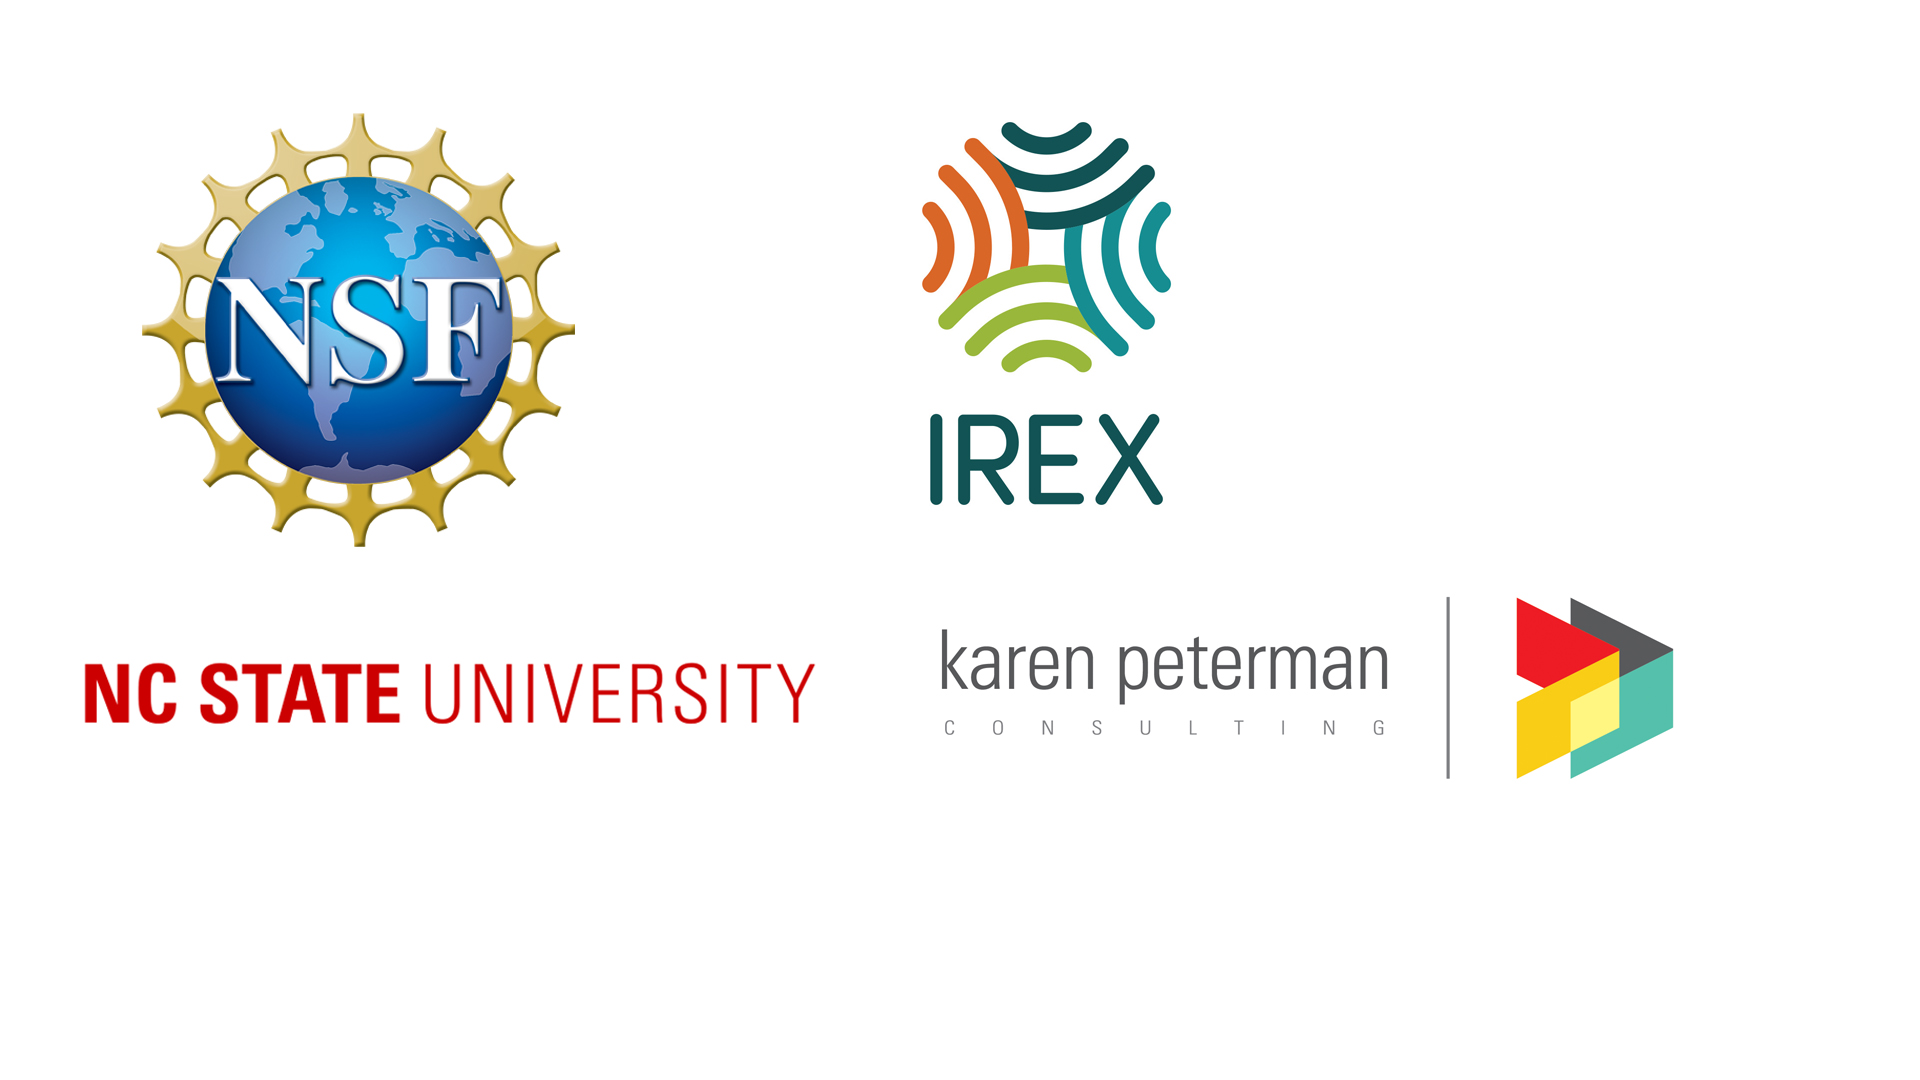 Partner Logos for National Science Foundation, IREX, North Carolina State University and Karen Peterman Consulting